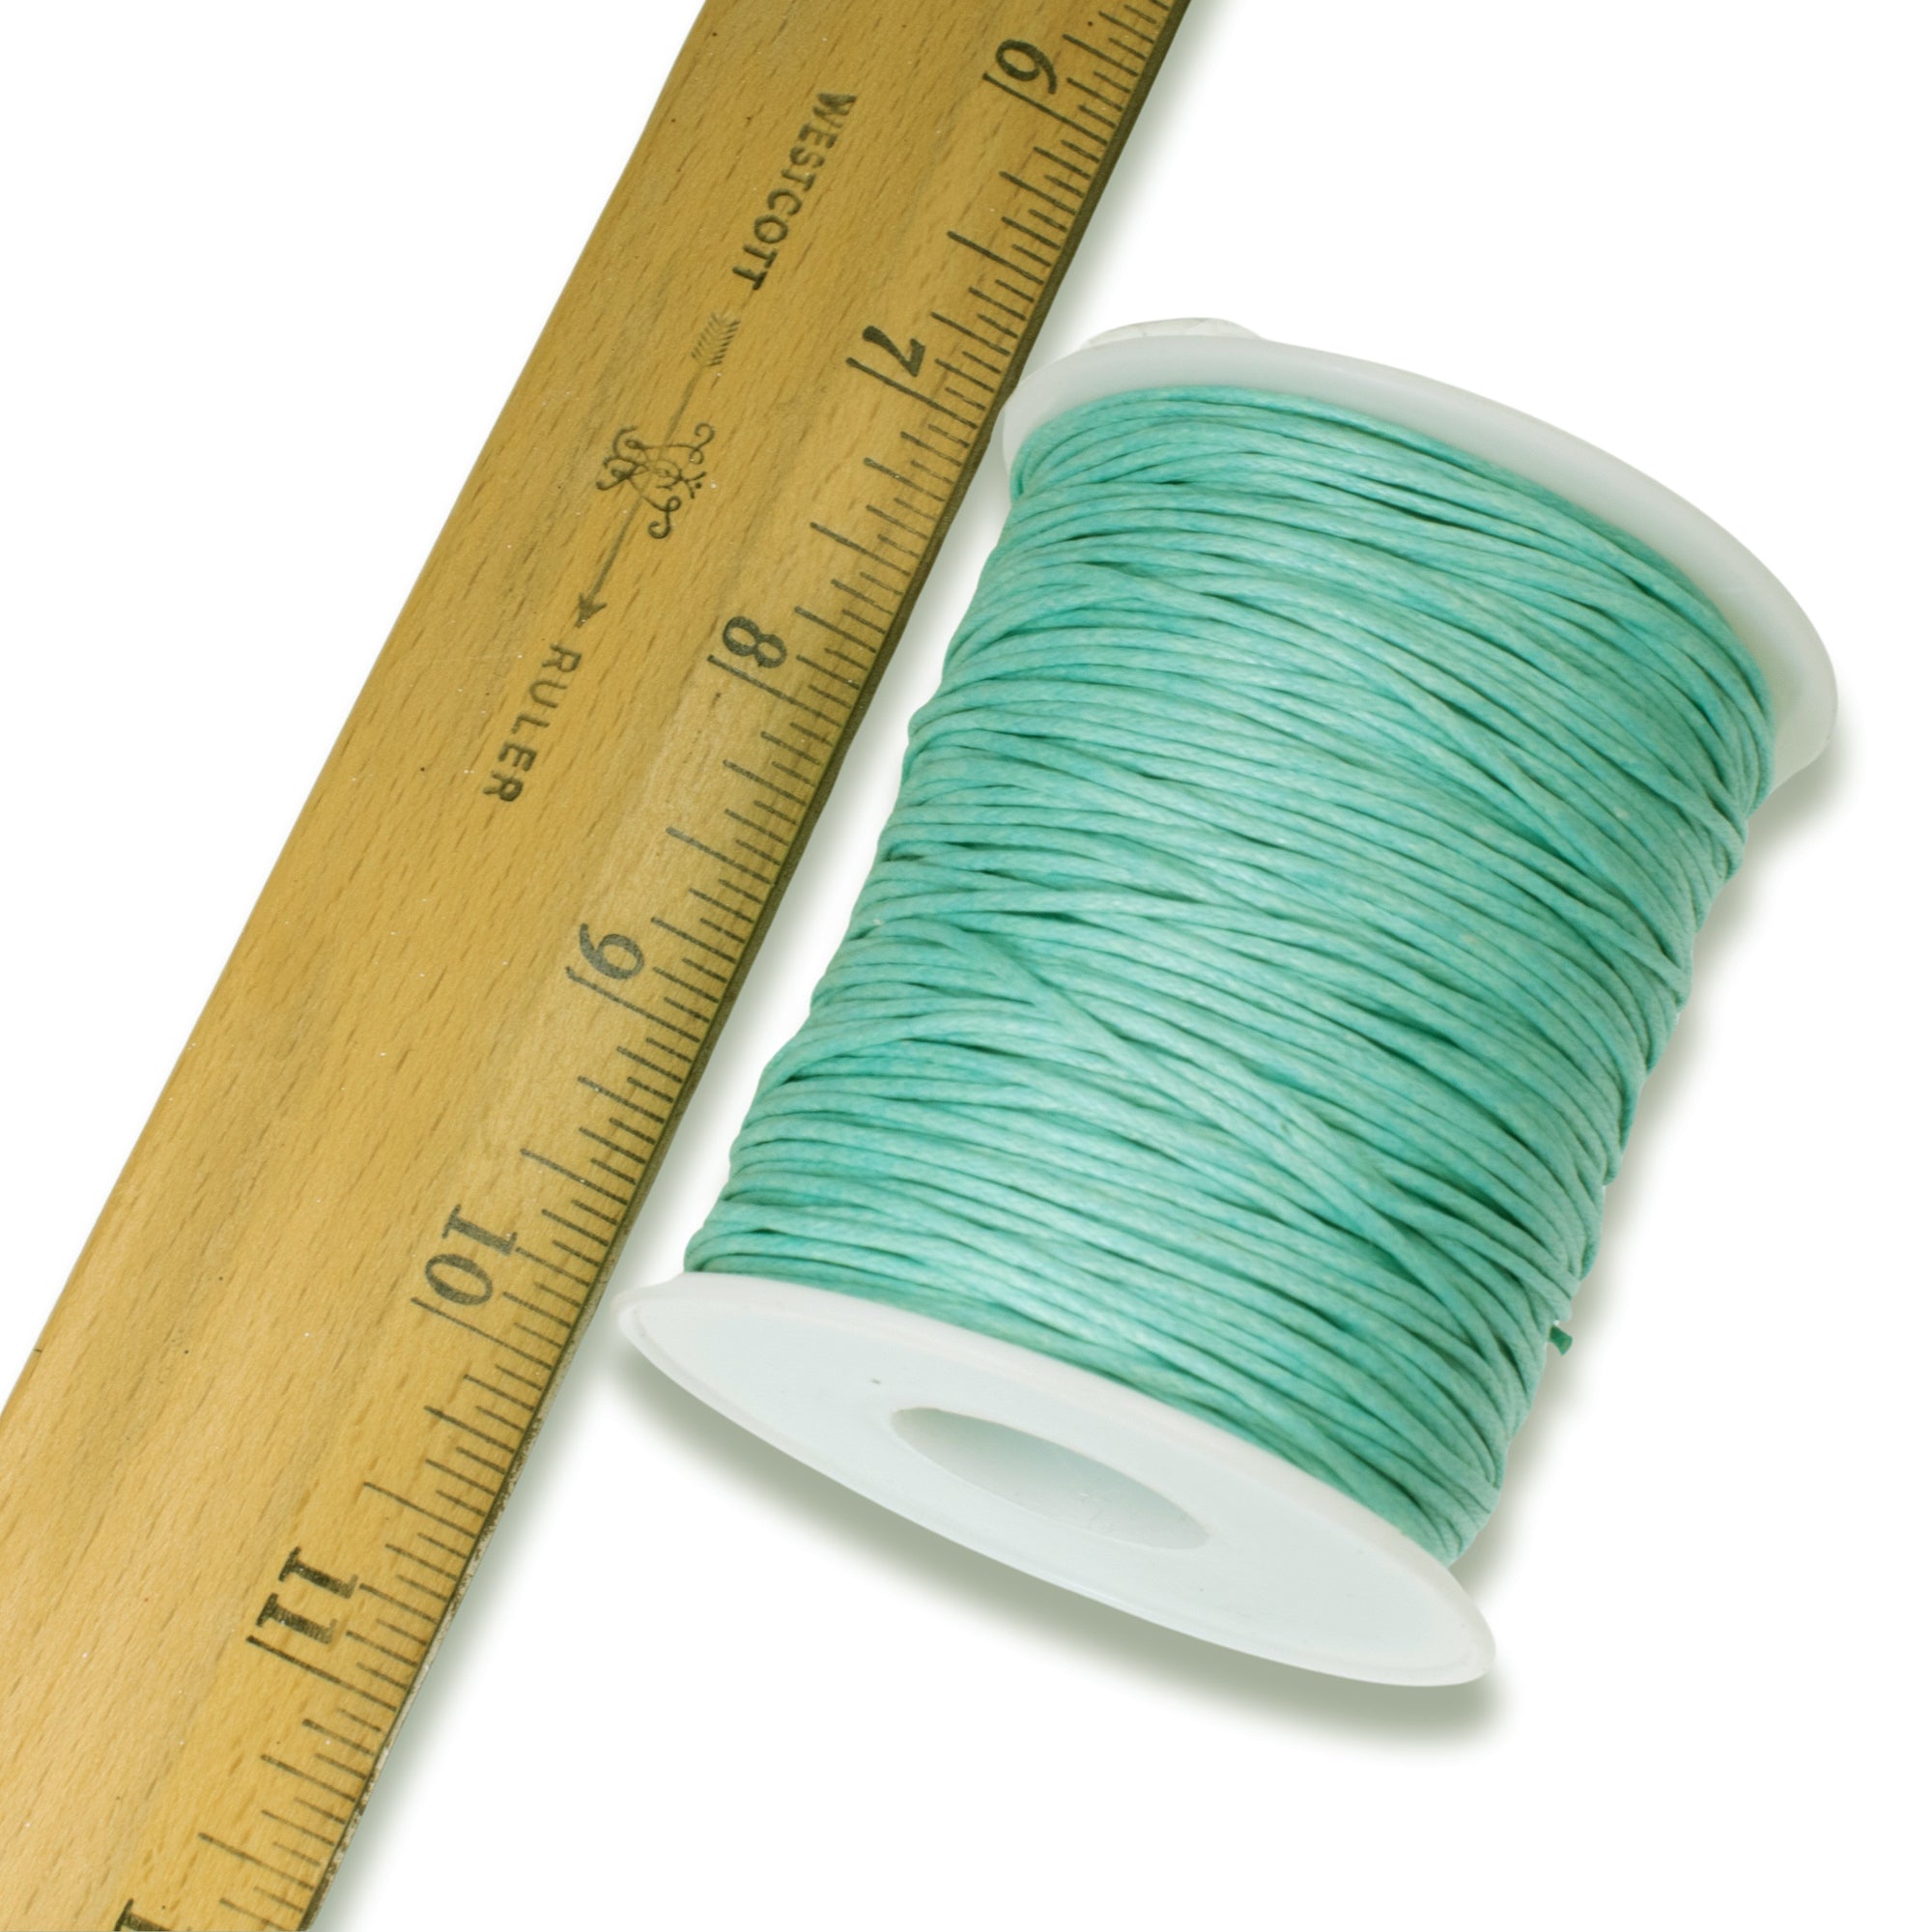 Buy Wax Cotton Cords - 1mm - Aquatin at wholesale prices